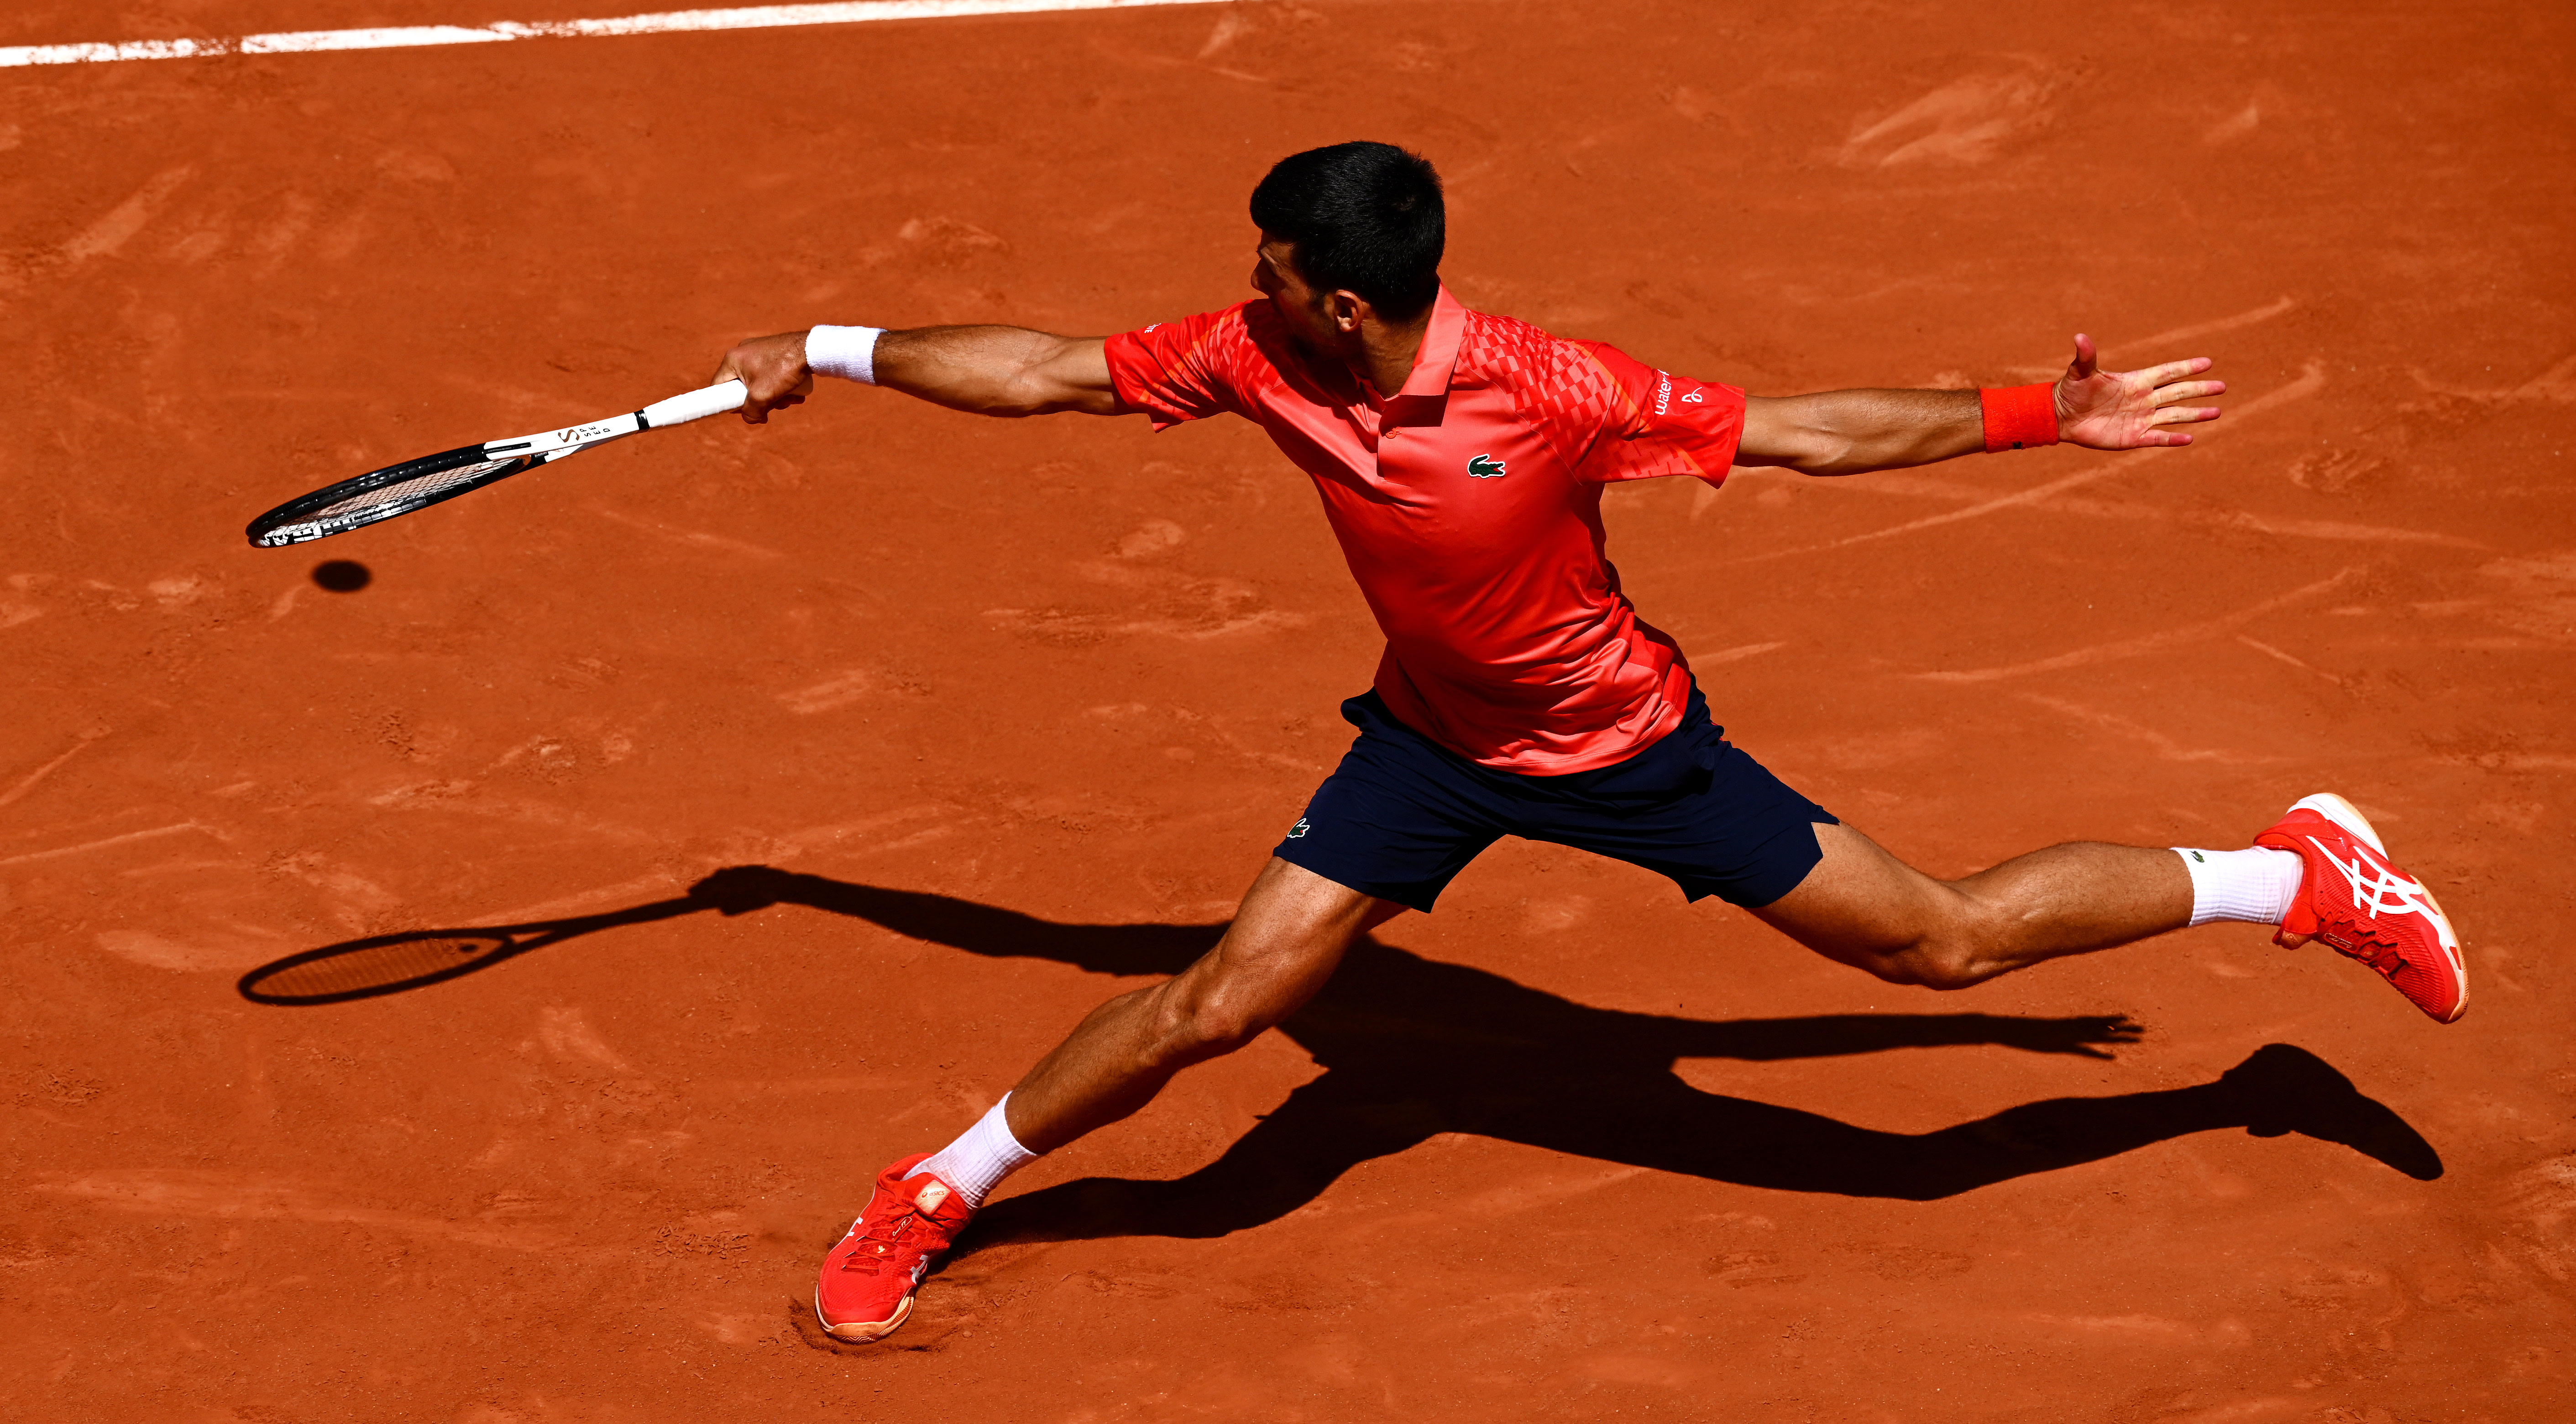 Stat of the Day Novak Djokovic is now 19-0 in his career in first-round matches at Roland Garros